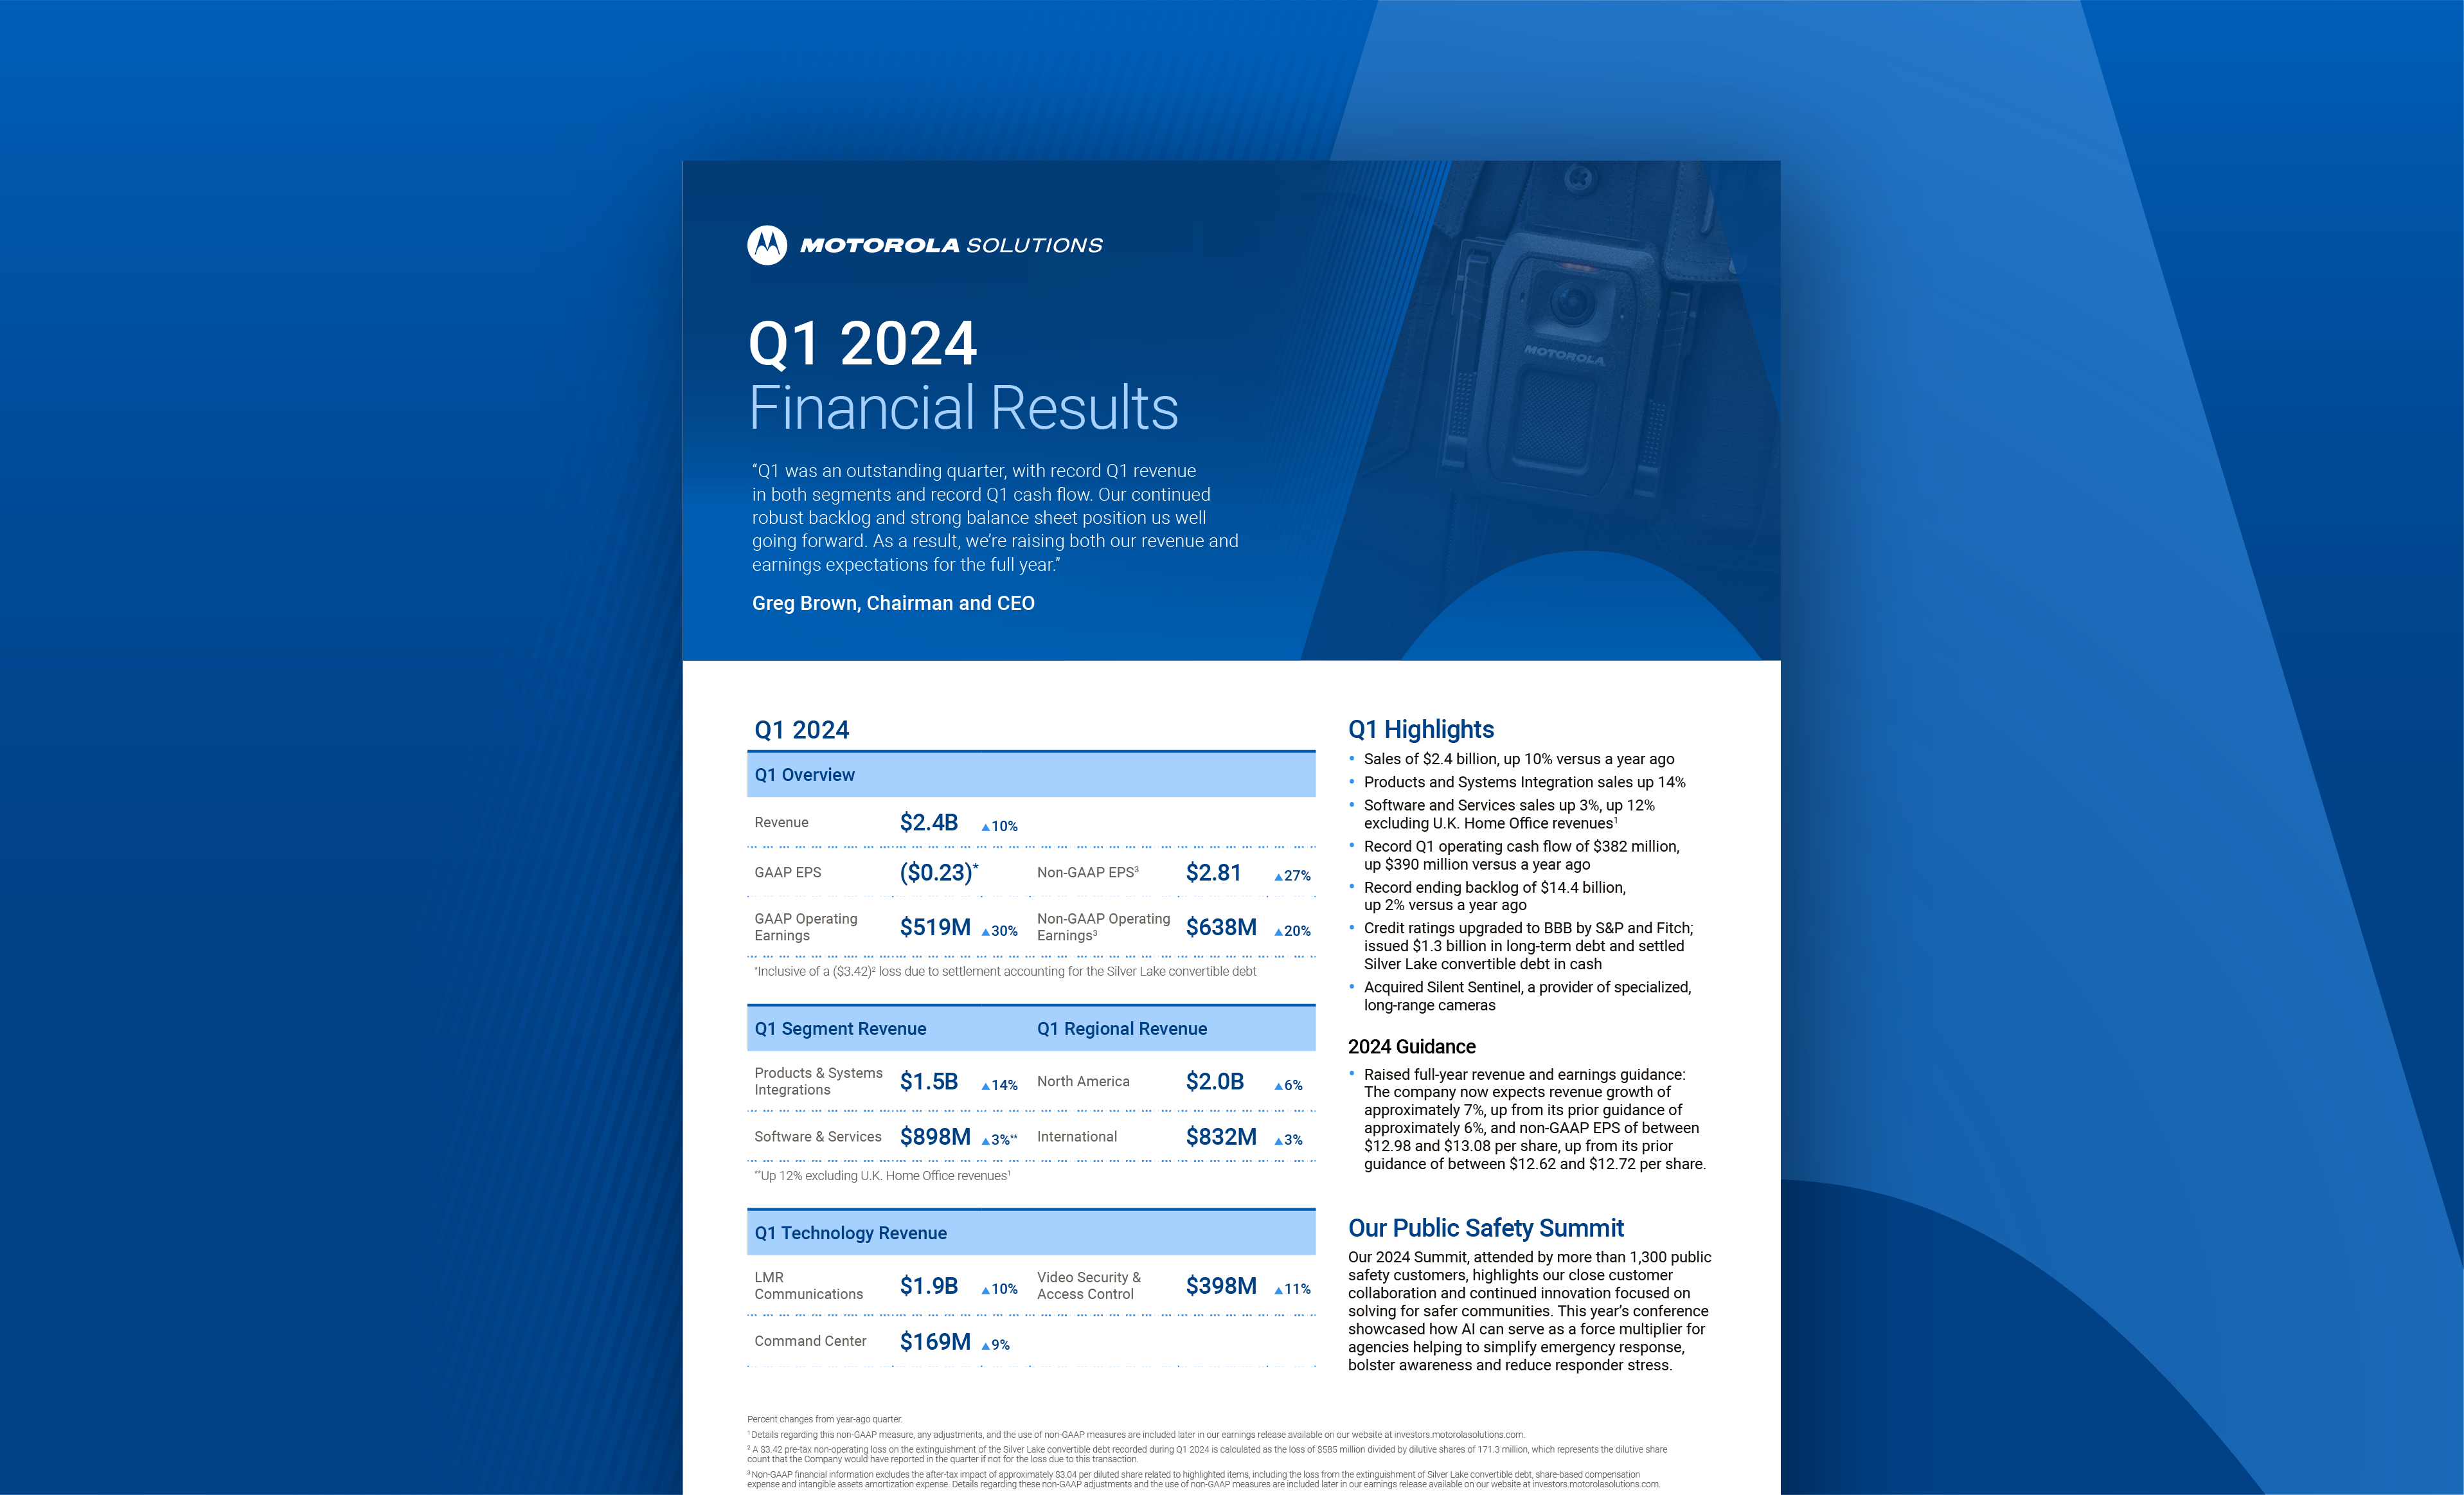 Blue and black background with image of Q1 earnings snapshot